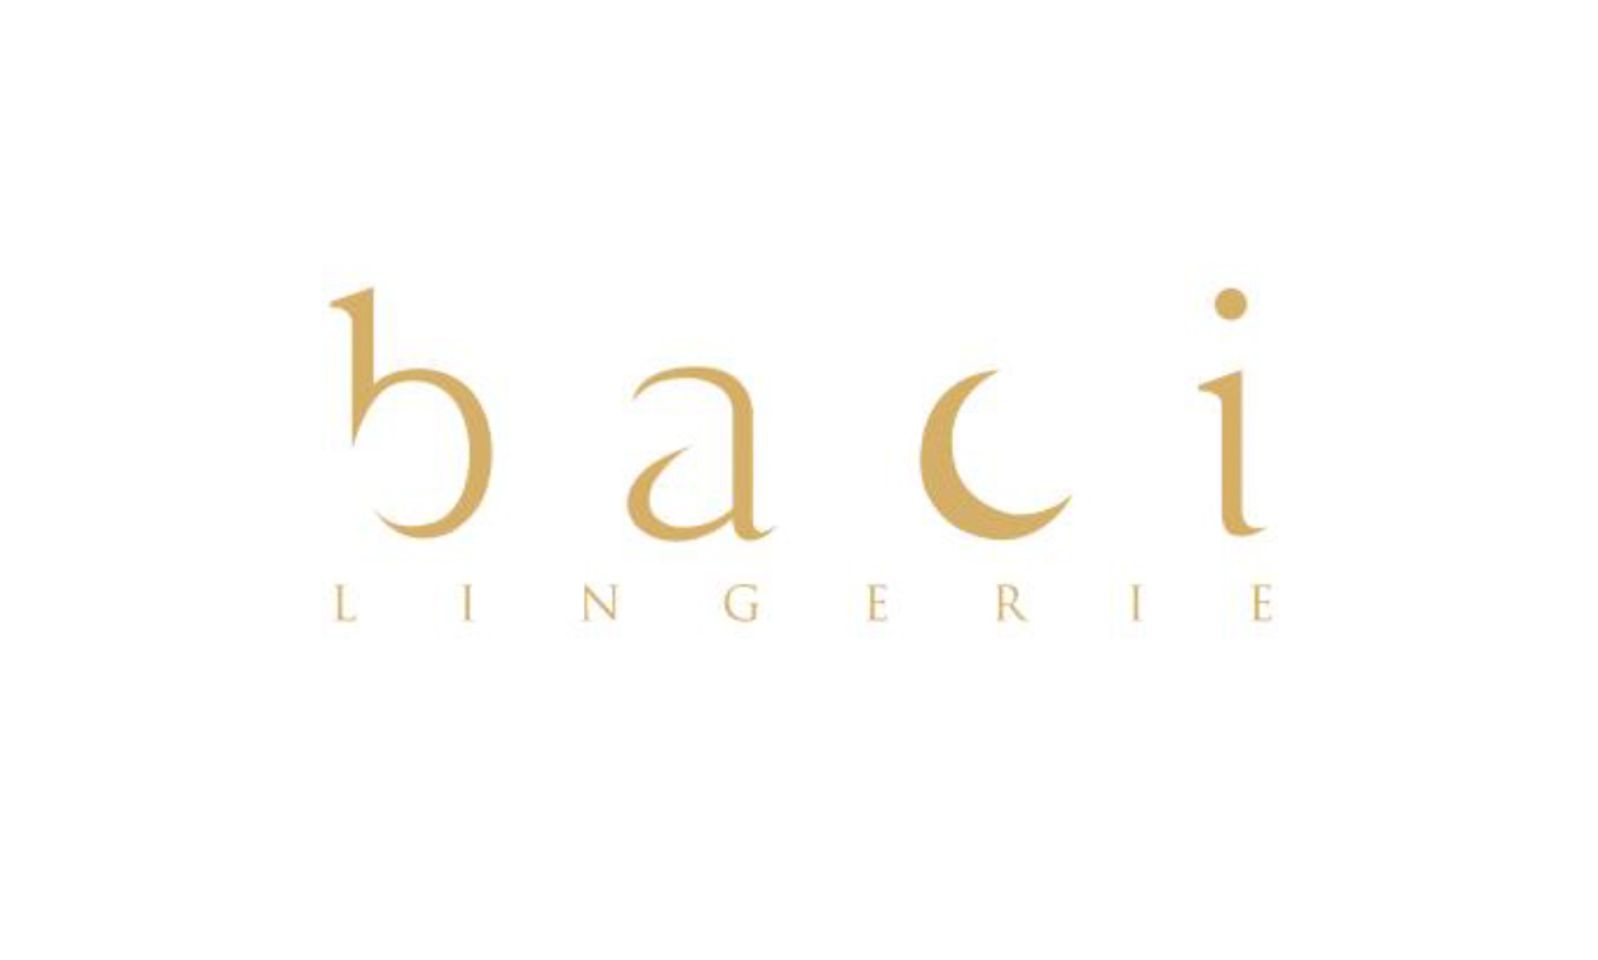 Baci Lingerie Reports Exhibition at eroFame a Total Success